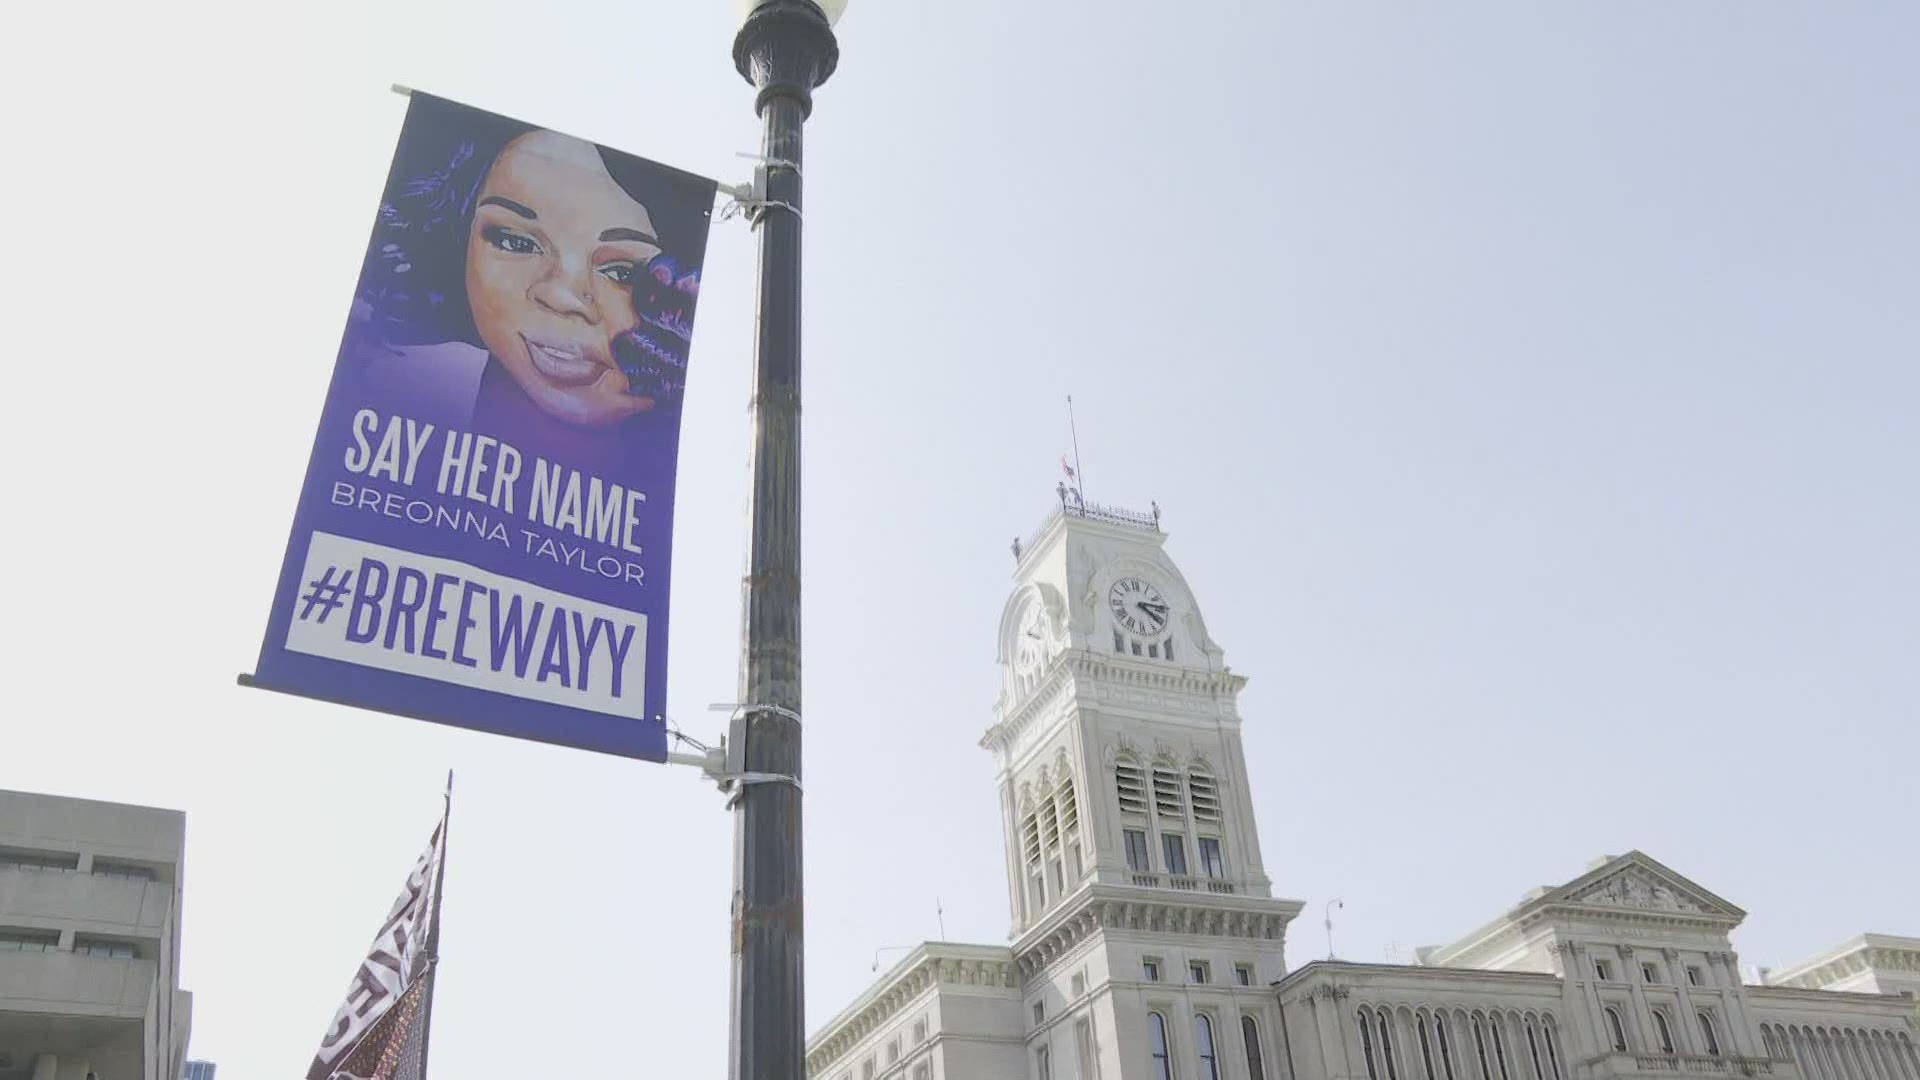 #Breewayy banners have been placed at Jefferson Square Park, honoring Breonna Taylor and David McAtee.